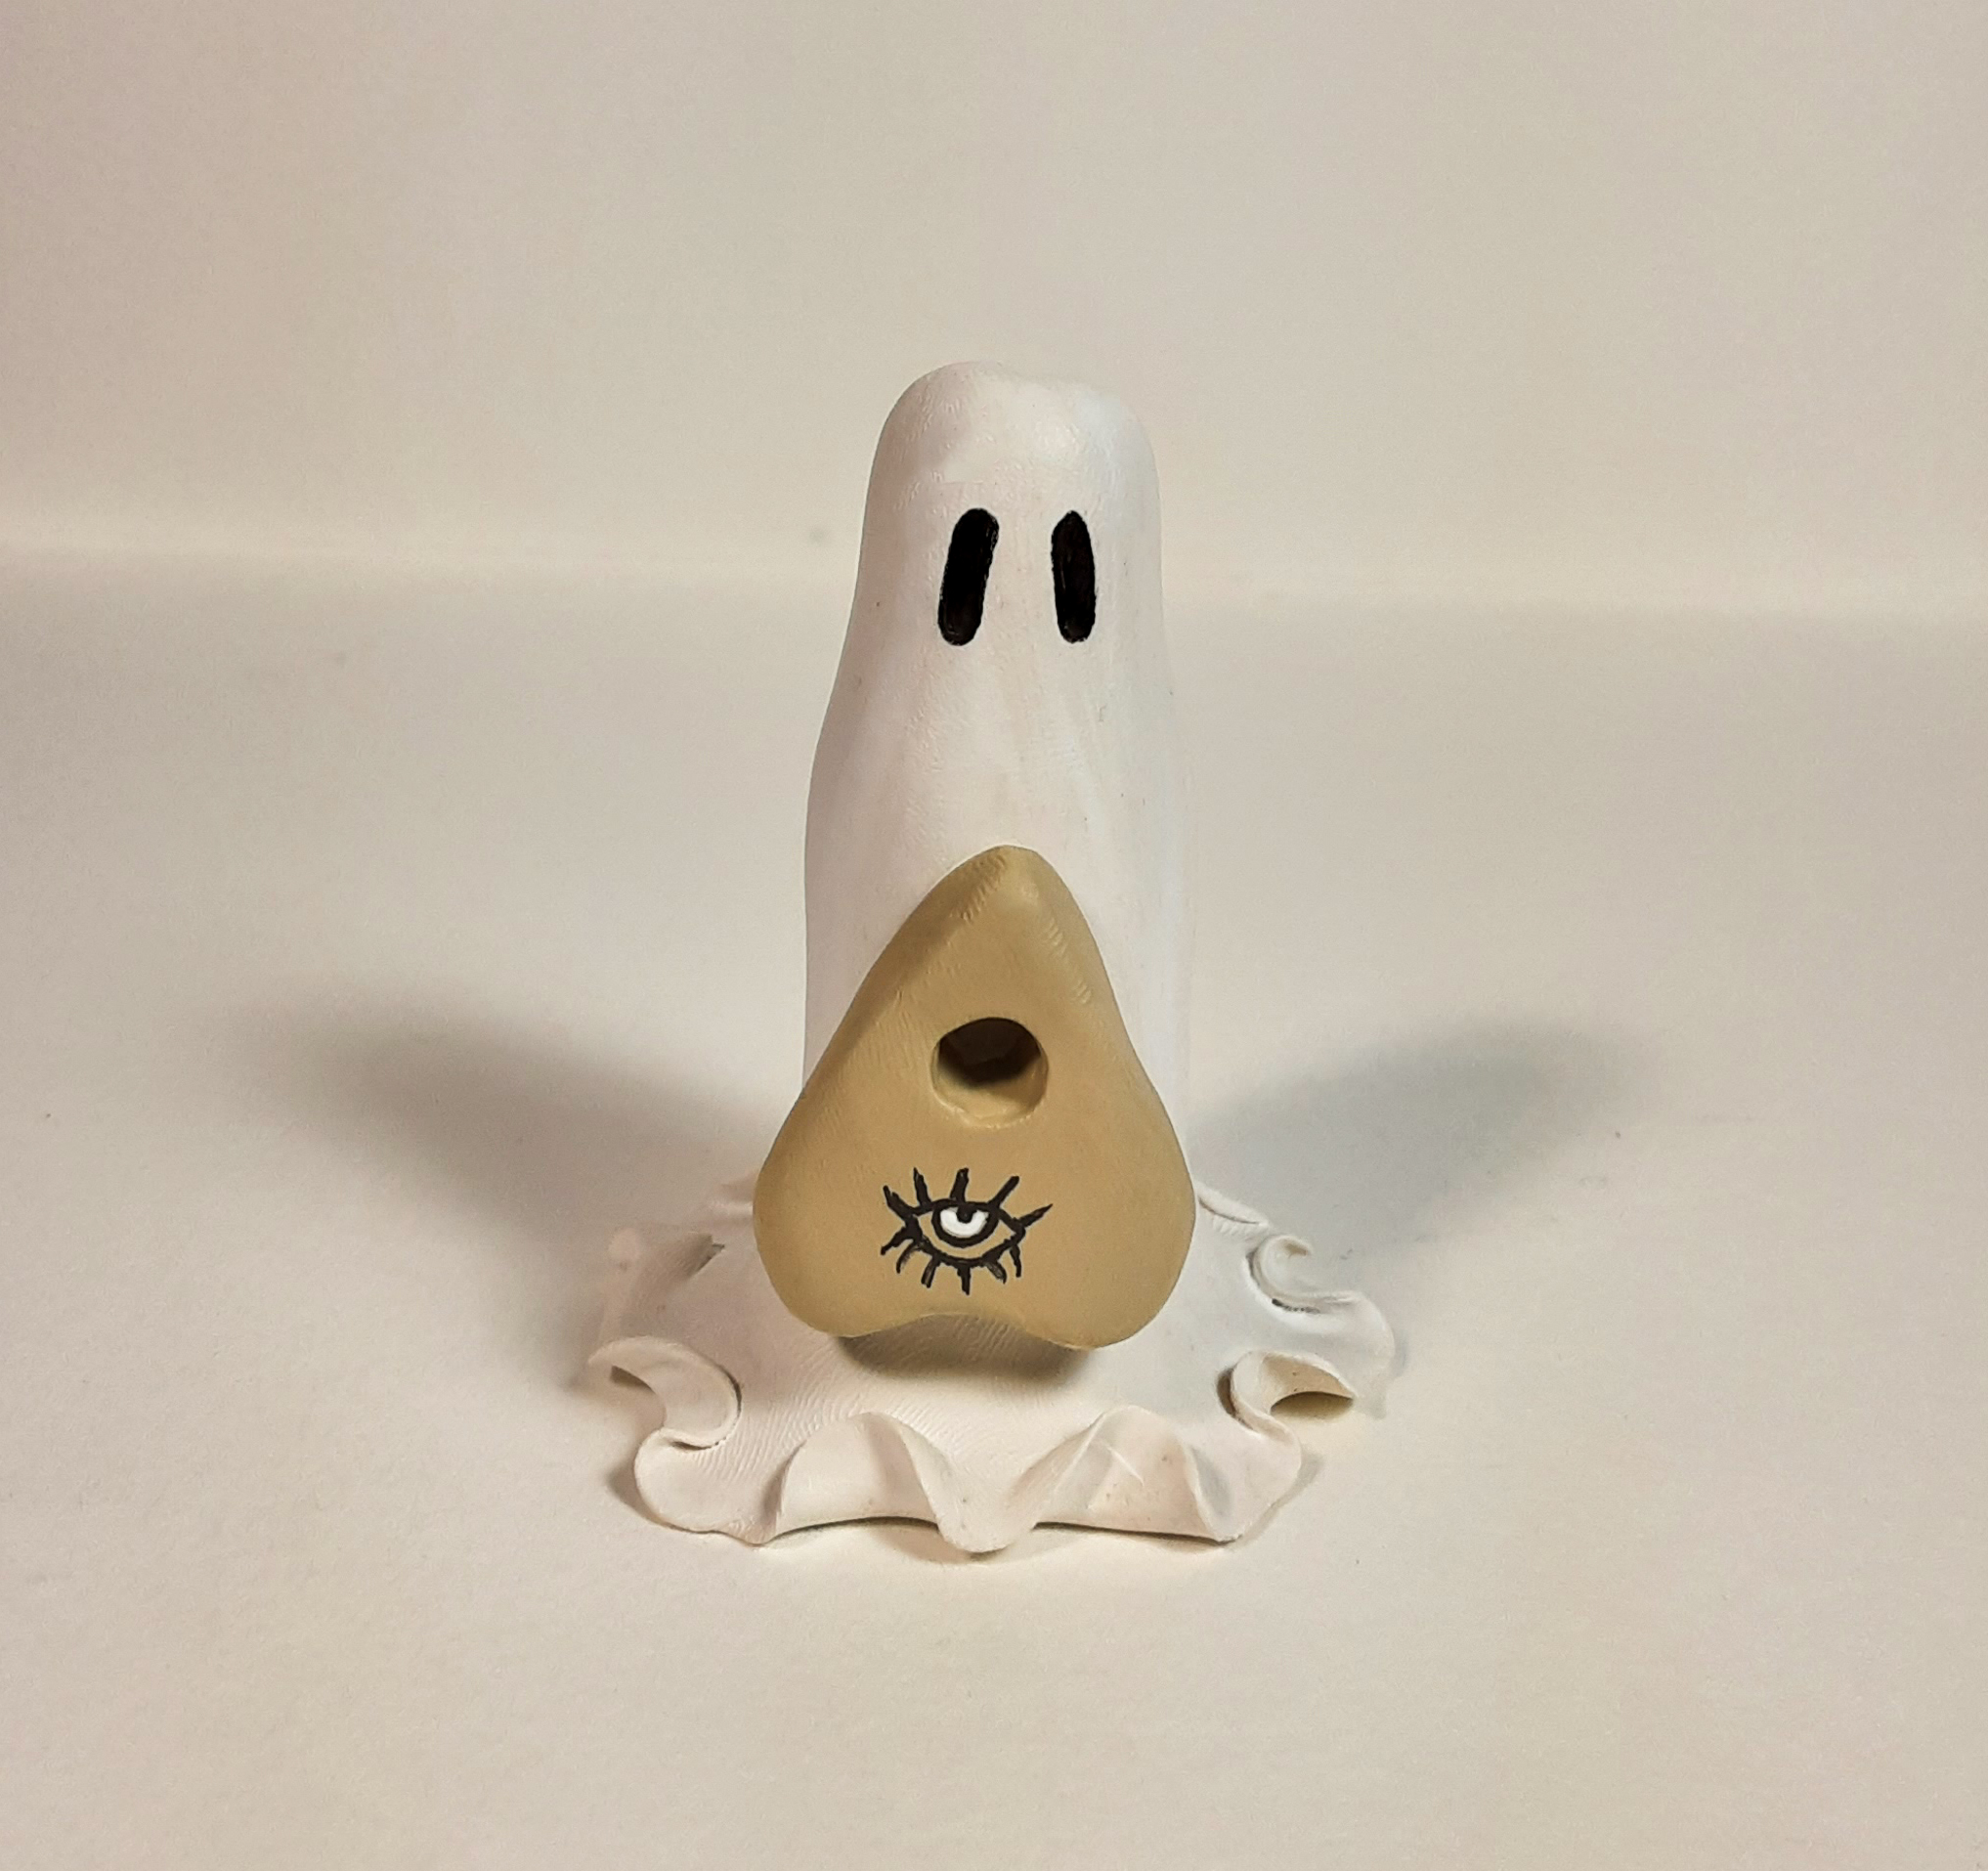 adopt-a-ghost-planchette-1